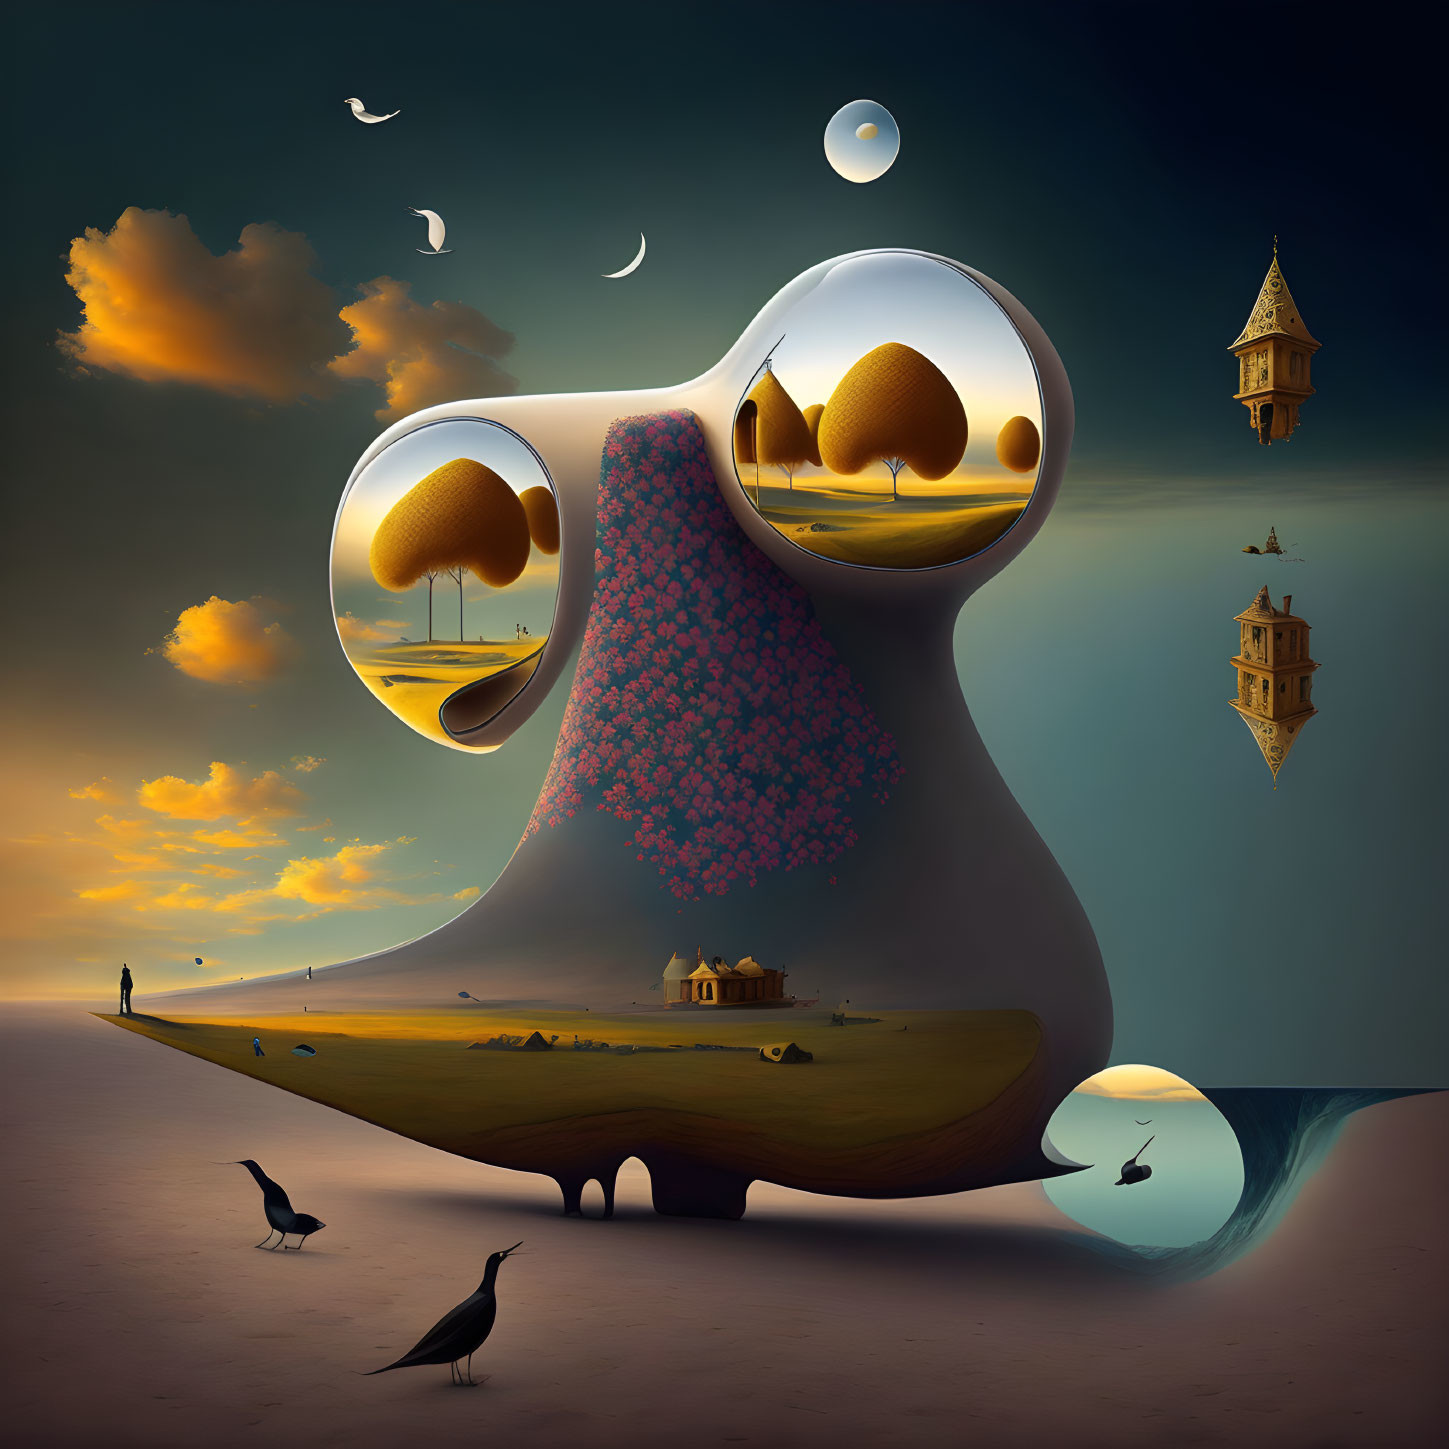 Surreal landscape with floating islands, reflective surfaces, birds, and lone observer